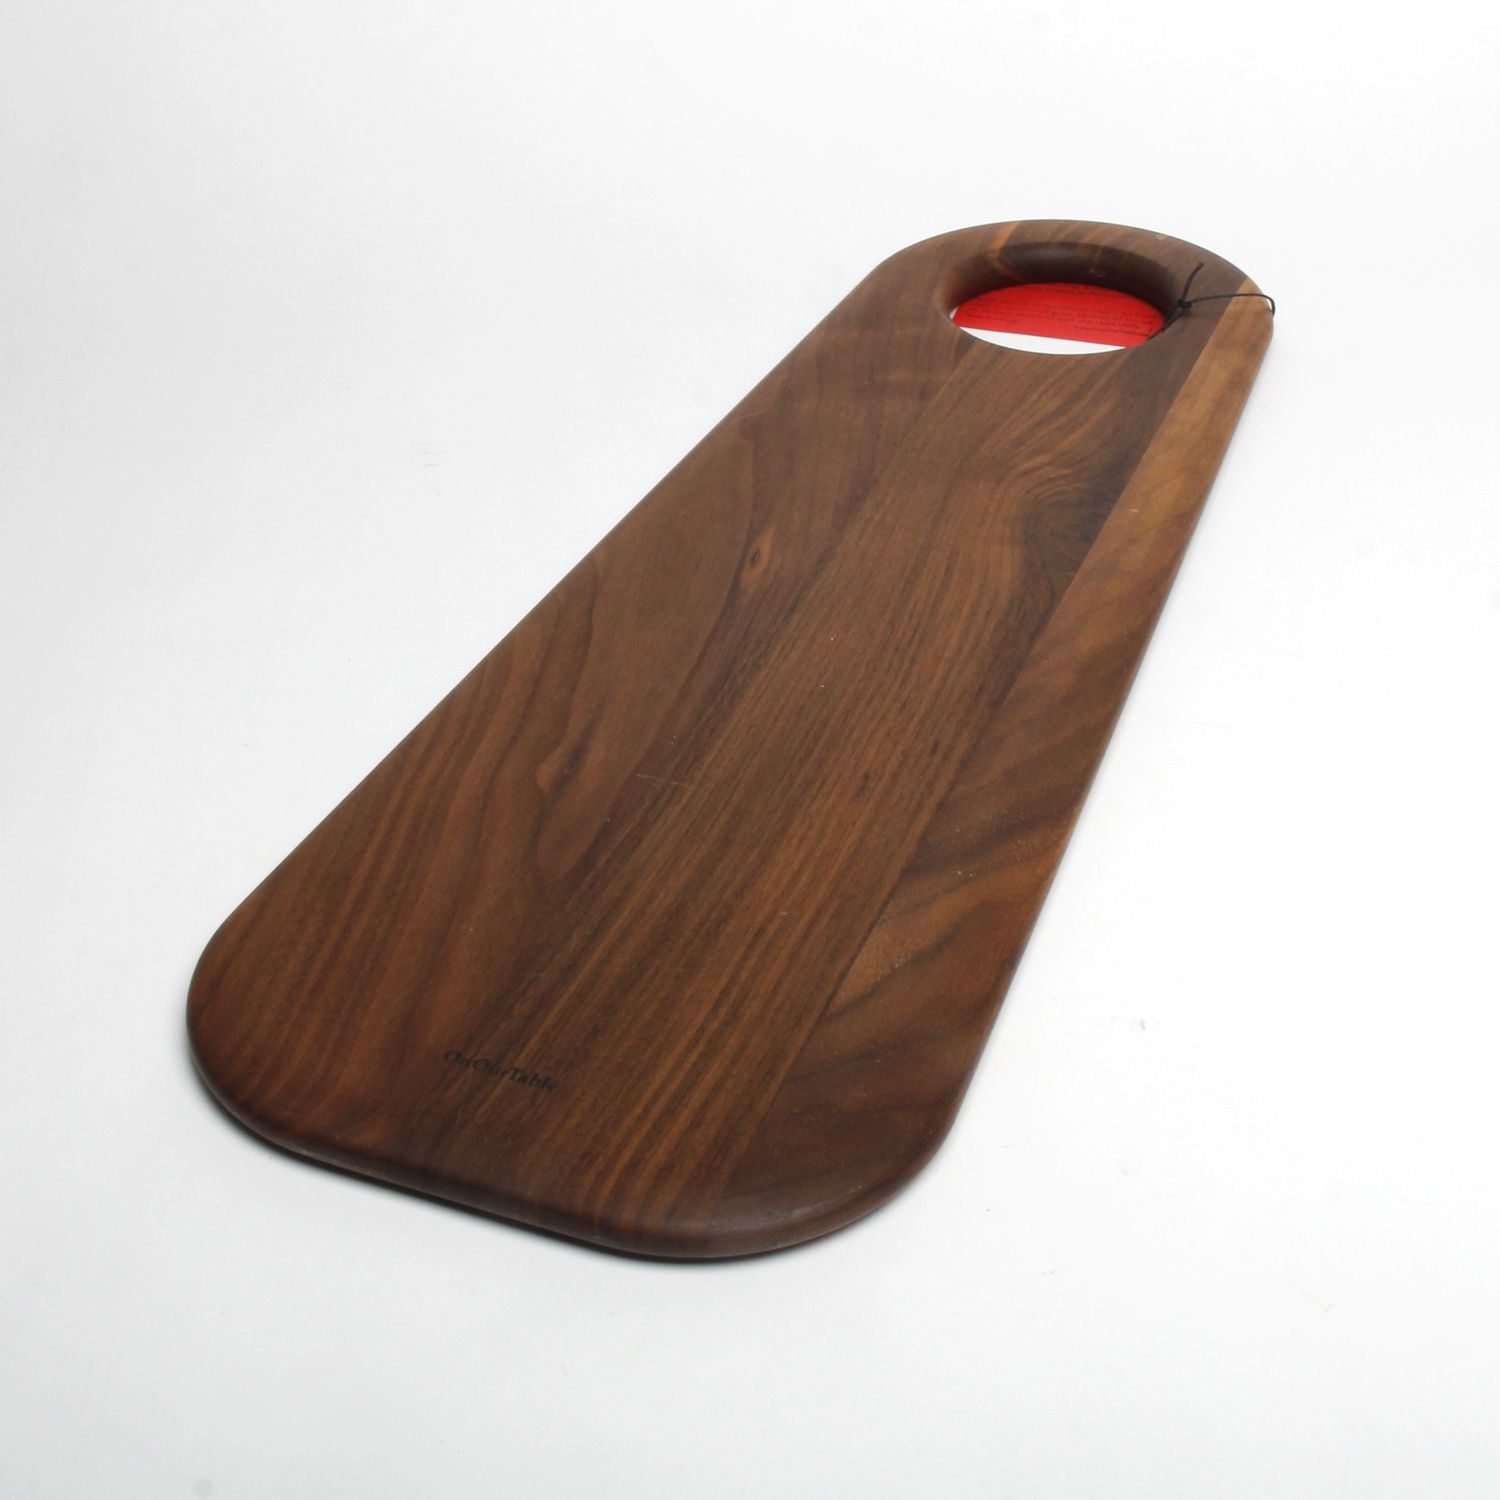 On Our Table: Board Walnut Product Image 3 of 4